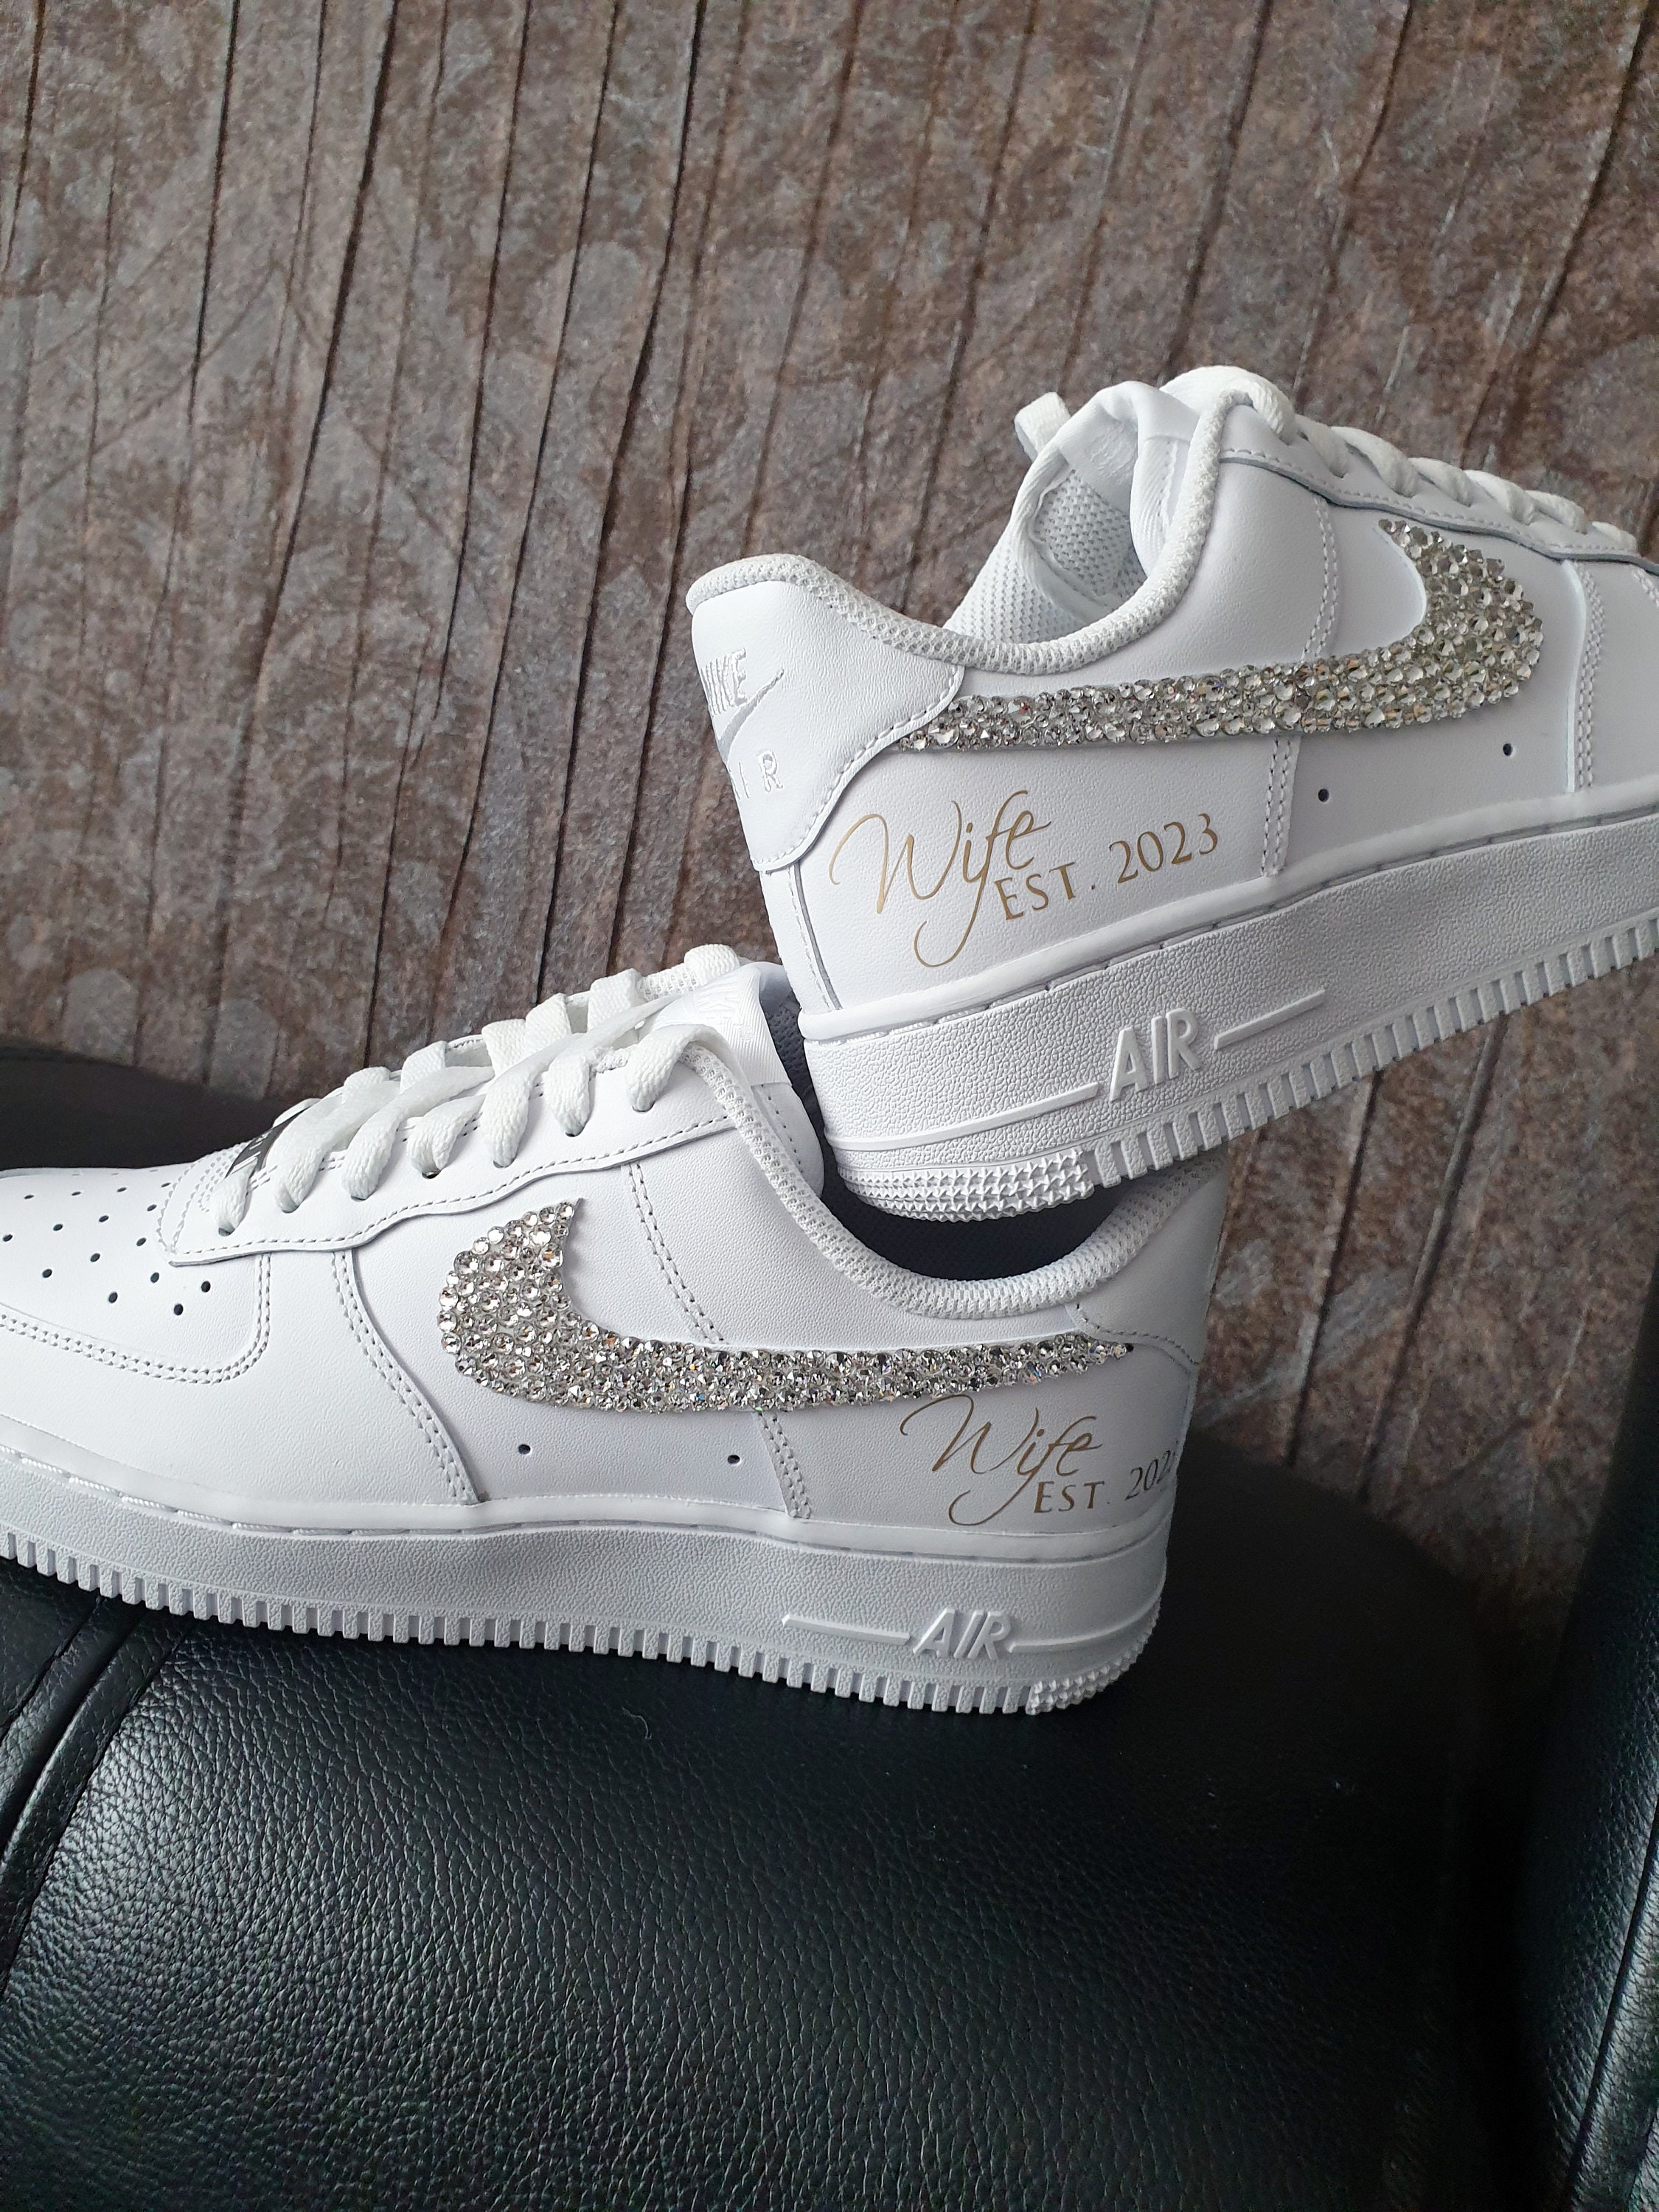 How to hand sew Air Force 1, Custom hand sewn Airforce 1 by @customsbyj1  inspired by cpfm airforces